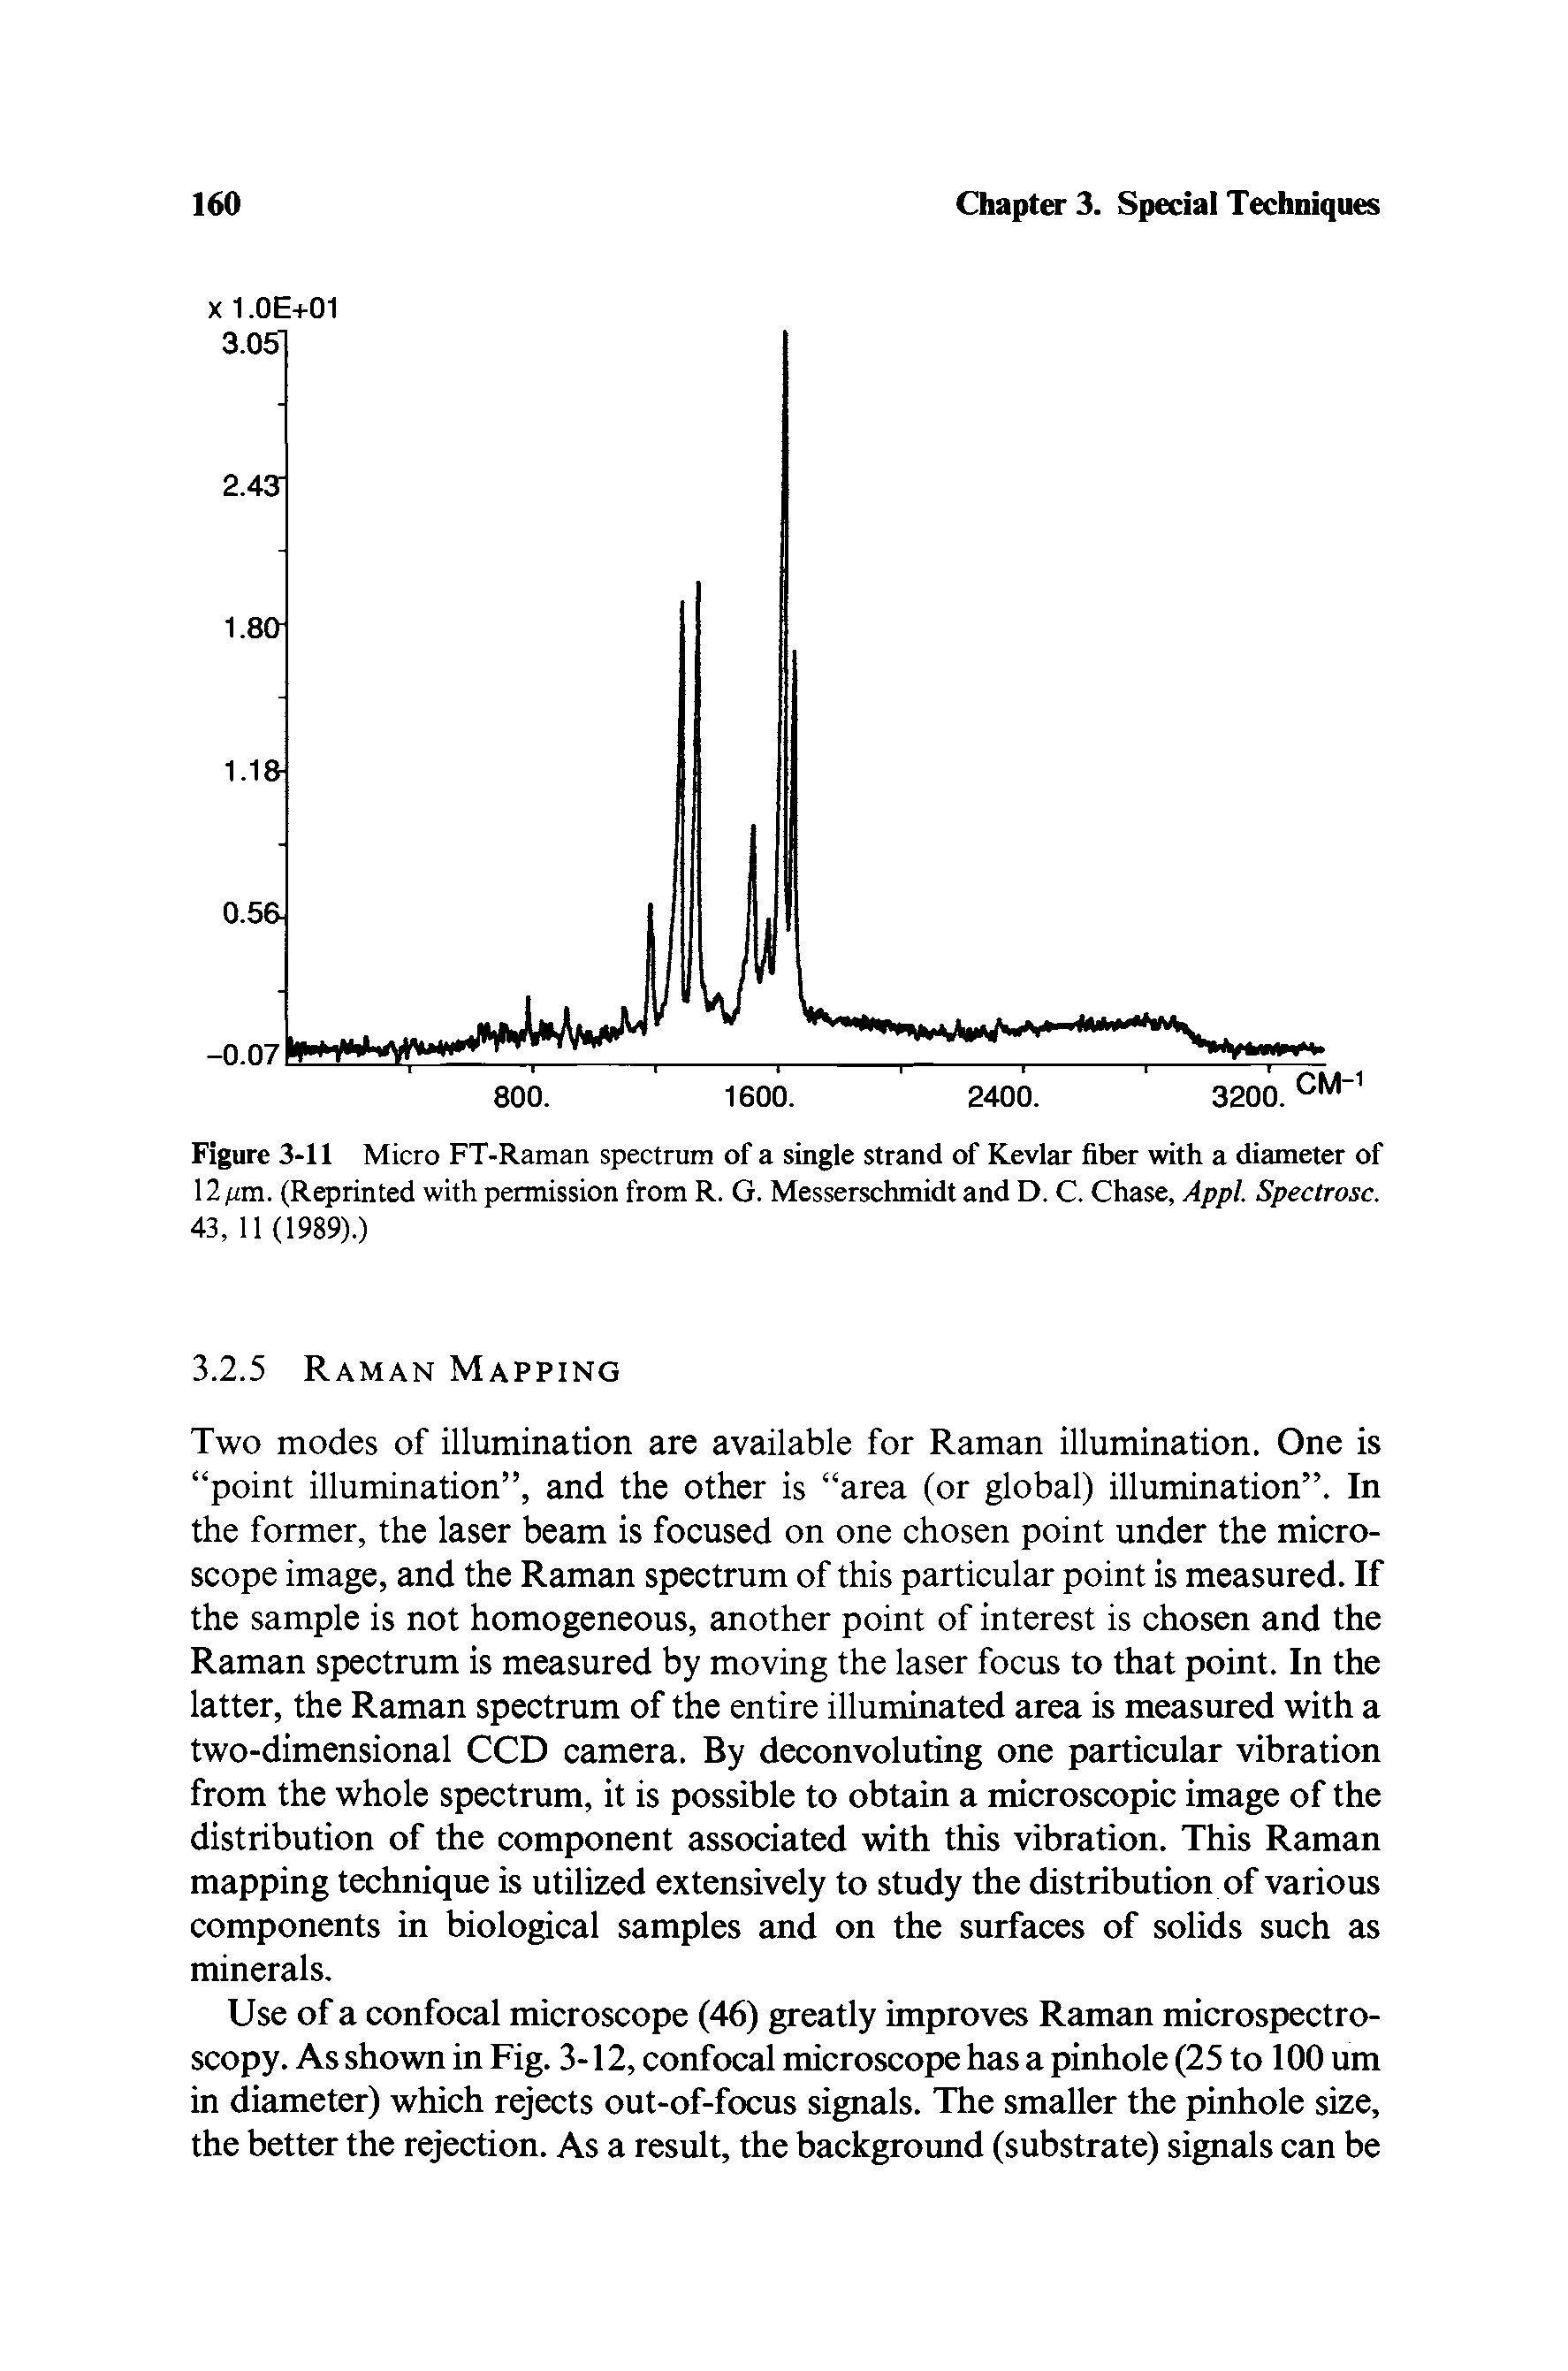 Figure 3-11 Micro FT-Raman spectrum of a single strand of Kevlar fiber with a diameter of 12 (im. (Reprinted with permission from R. G. Messerschmidt and D. C. Chase, Appl. Spectrosc. 43, 11 (1989).)...